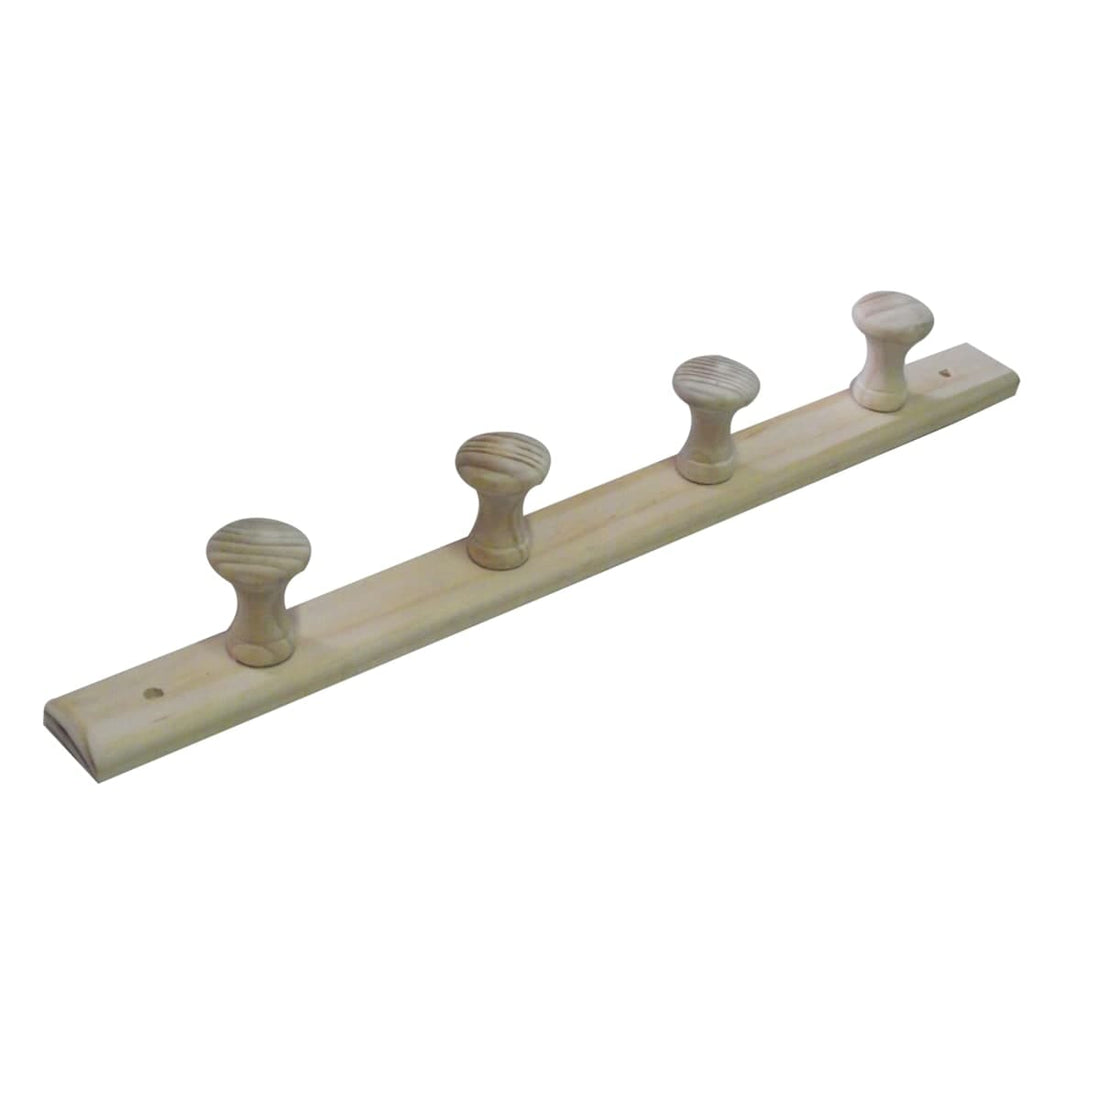 4-PLACE COAT RACK IN UNTREATED WOOD - best price from Maltashopper.com BR410331099